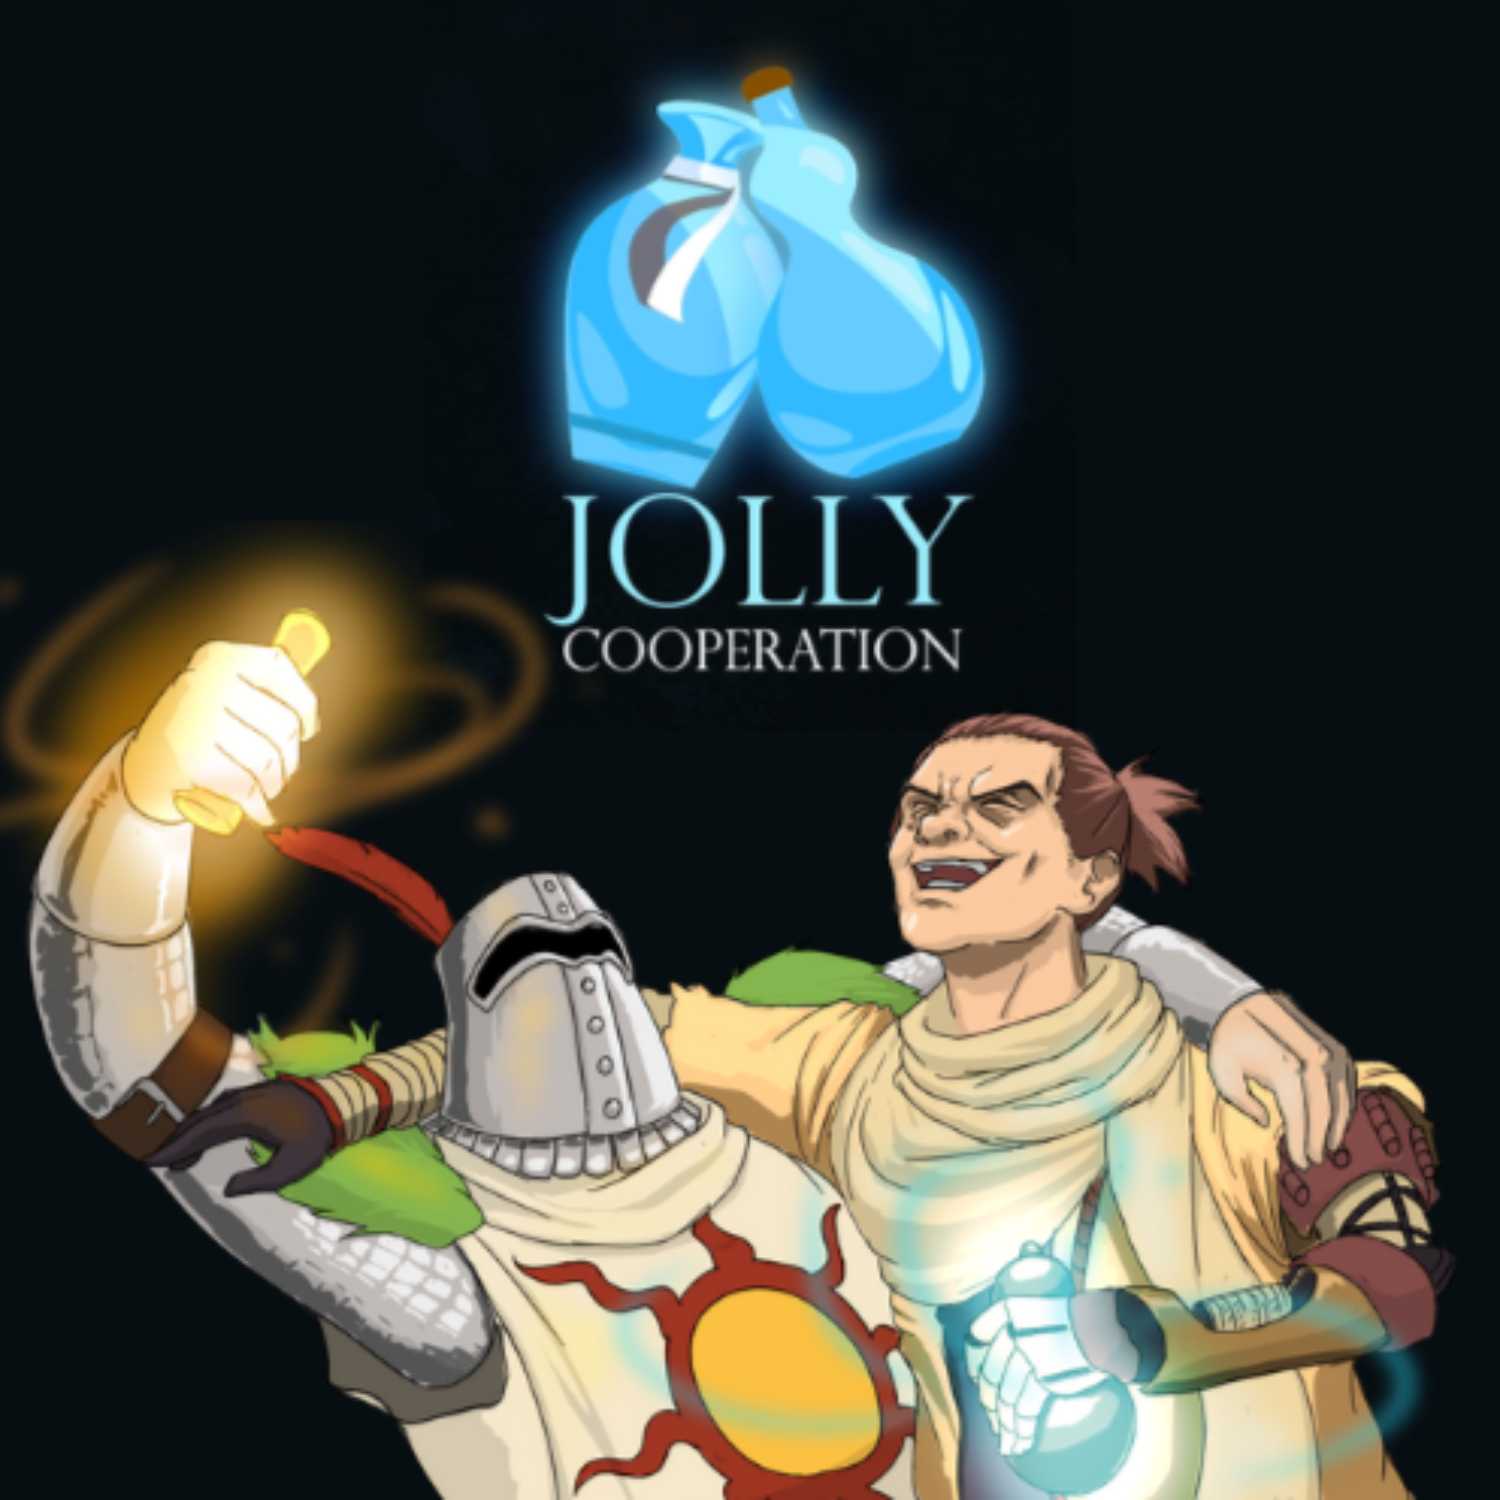 Jolly Cooperation Podcast S1 Ep 3 | Elden Ring Lore and Bosses